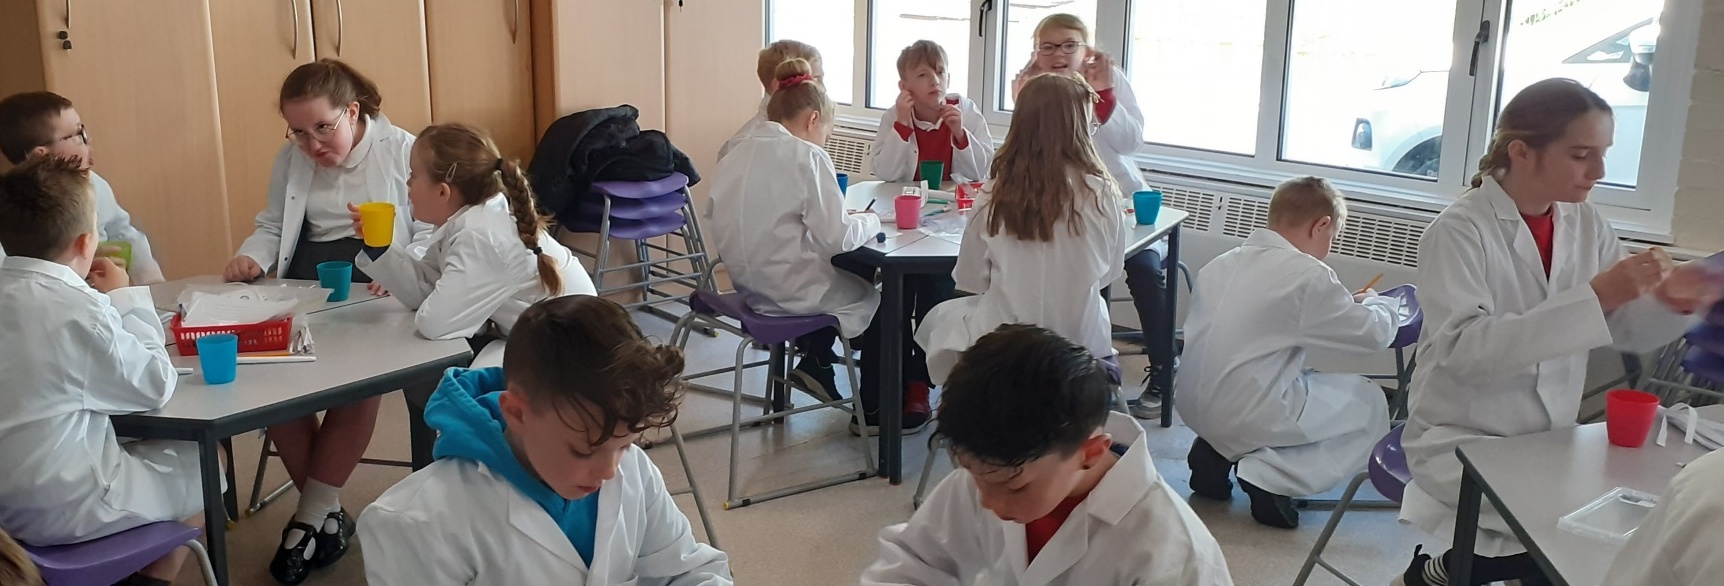 Primary pupils gathered around tables working - they are wearing white lab coats